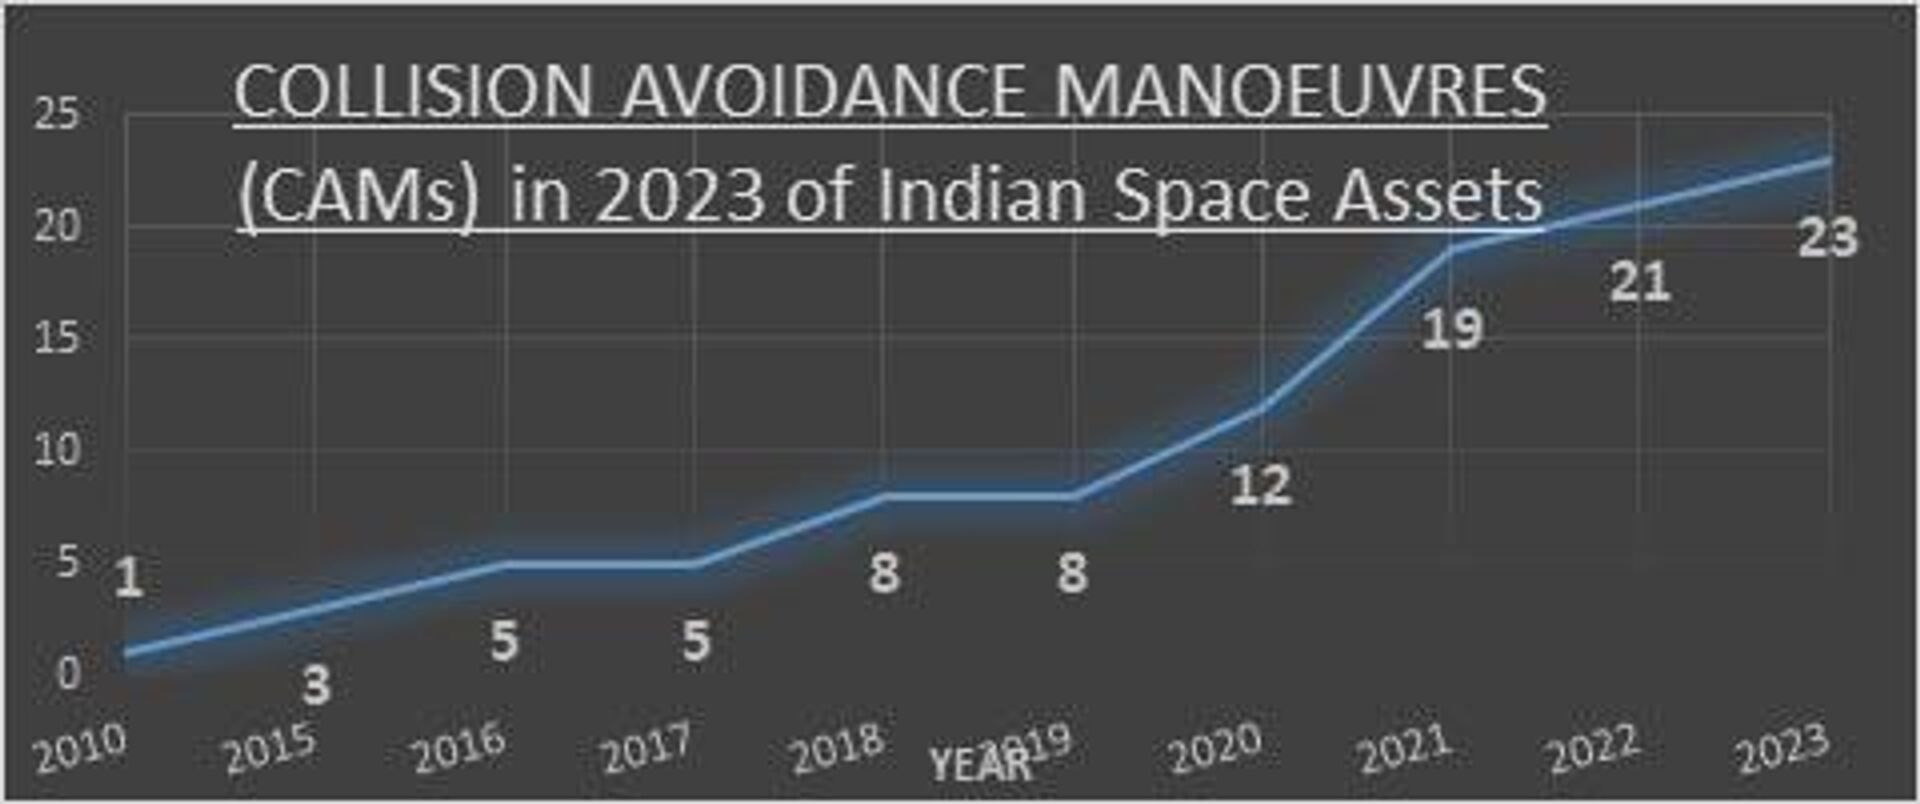 ISRO Carried Out 23 Satellites Saving Collision Avoidance Manoeuvres in 2023 - Sputnik India, 1920, 29.04.2024